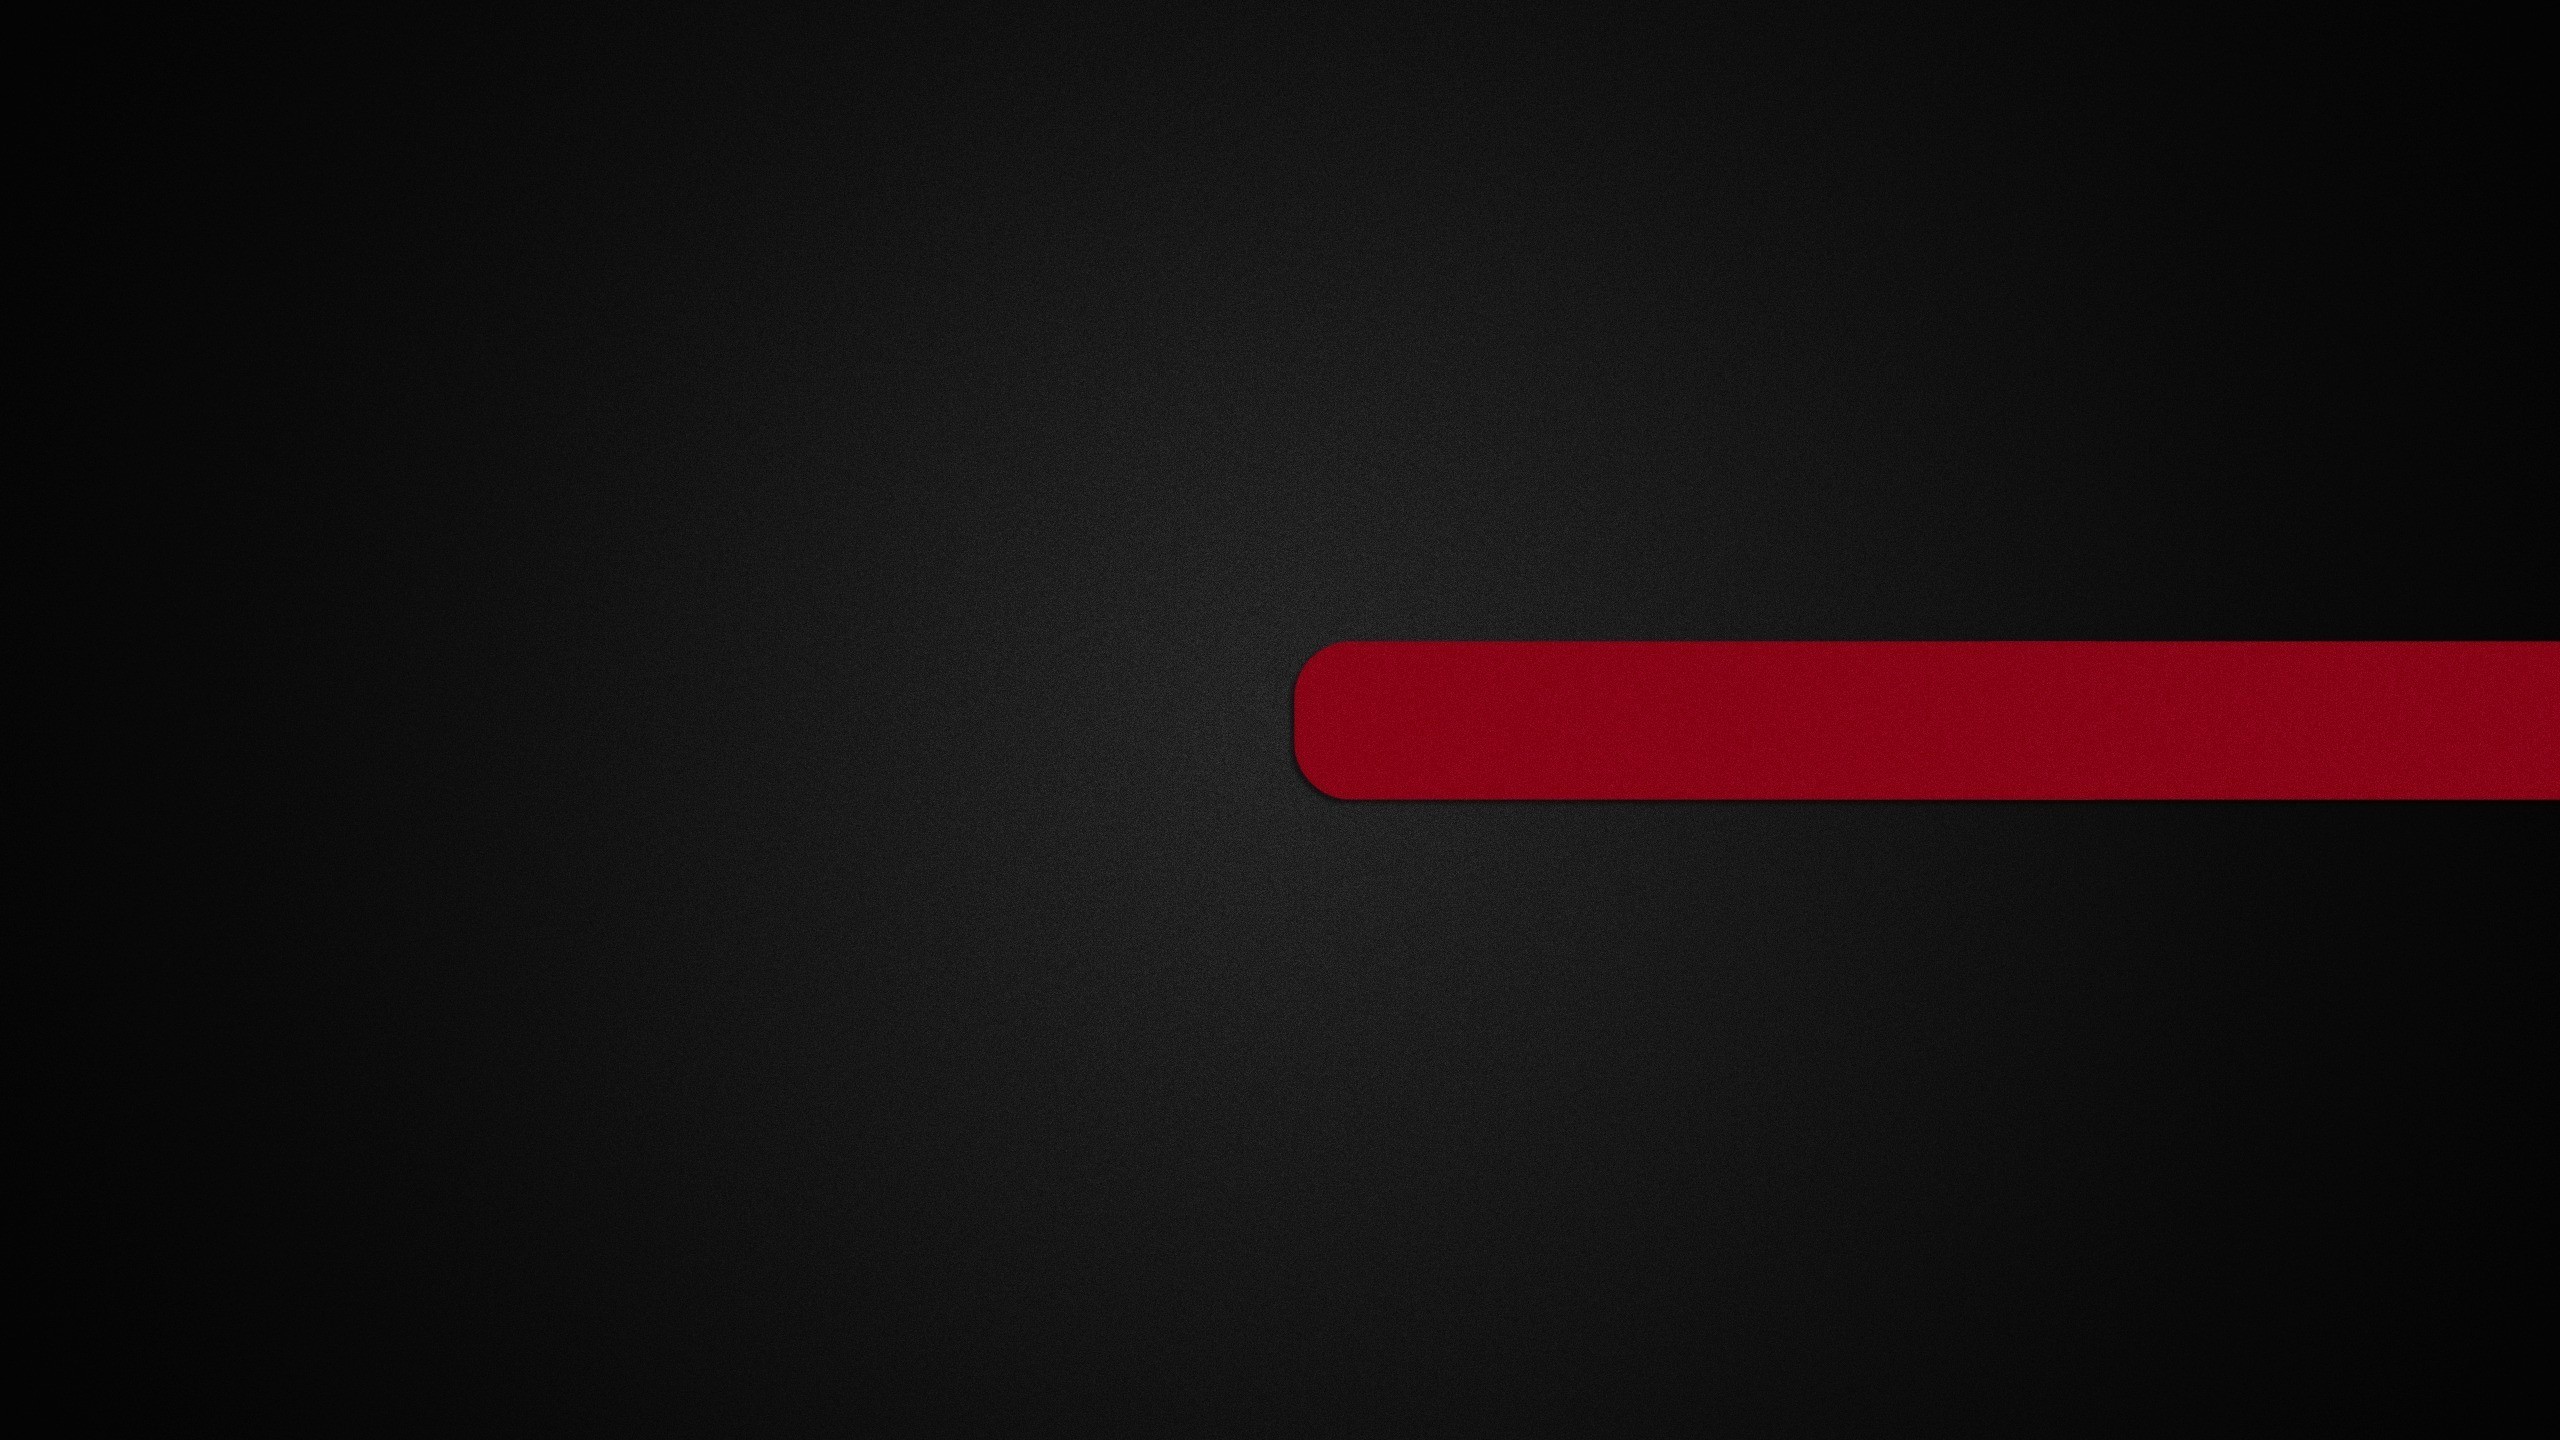  Black  And Red  Wallpapers  Download Free PixelsTalk Net